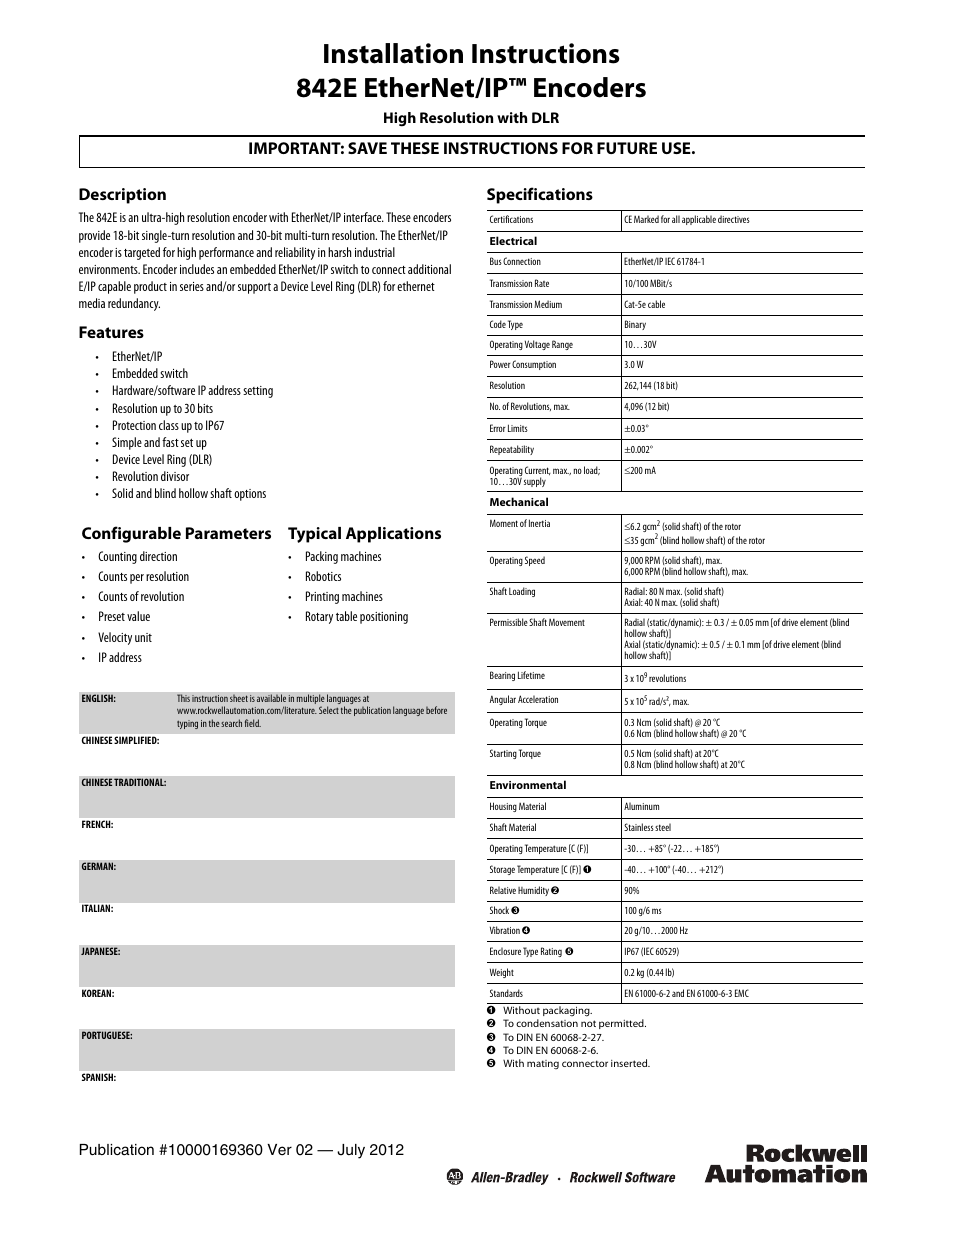 Rockwell Automation 842E EtherNet/IP Multi-Turn Encoders User Manual | 4 pages